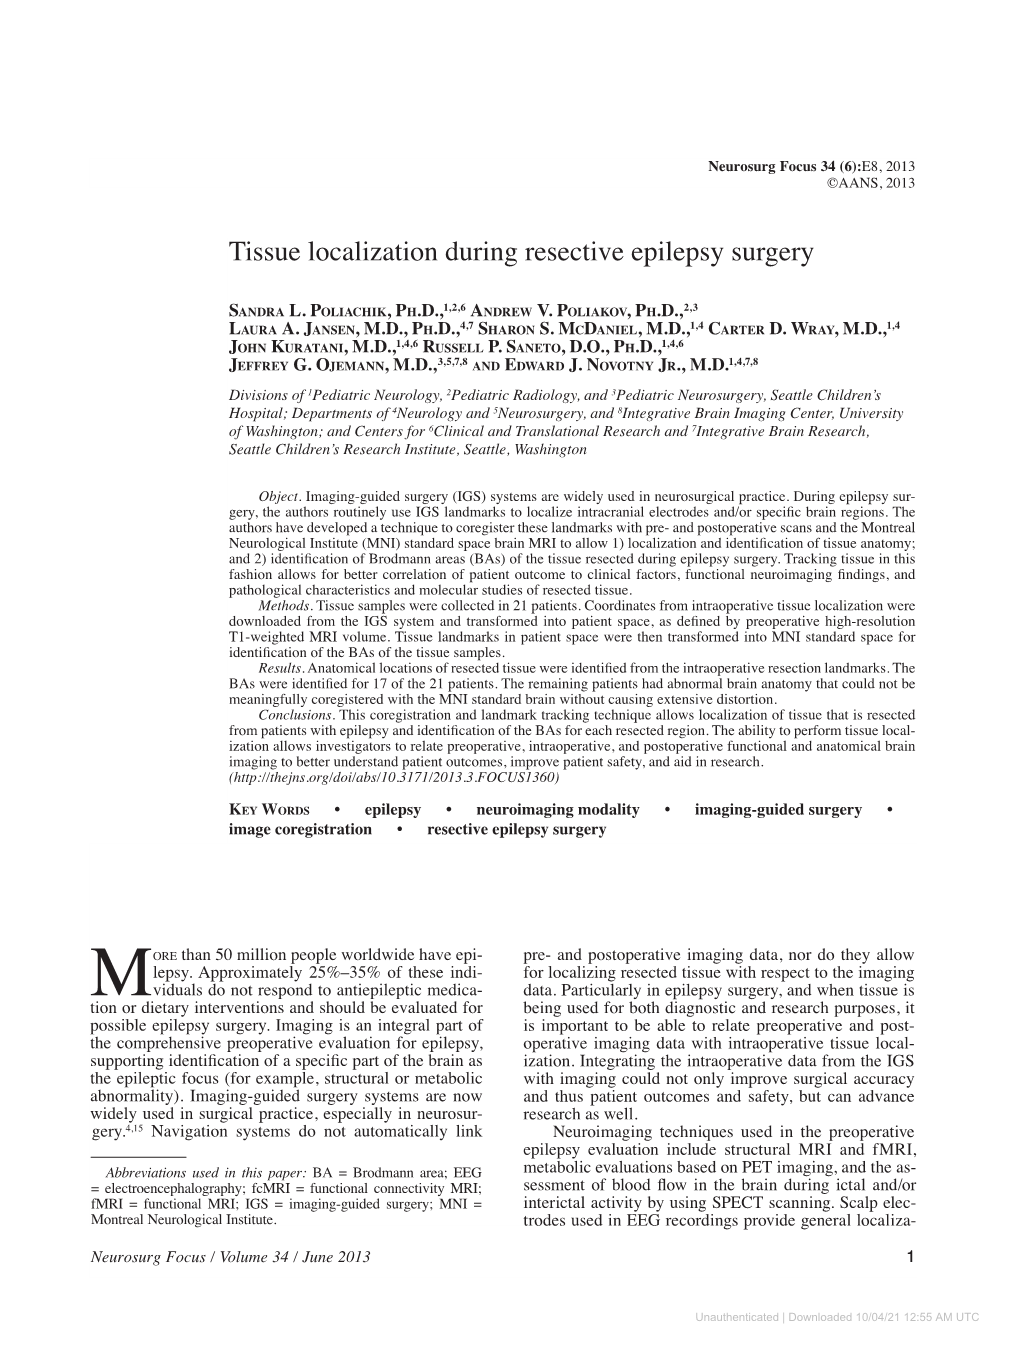 Tissue Localization During Resective Epilepsy Surgery